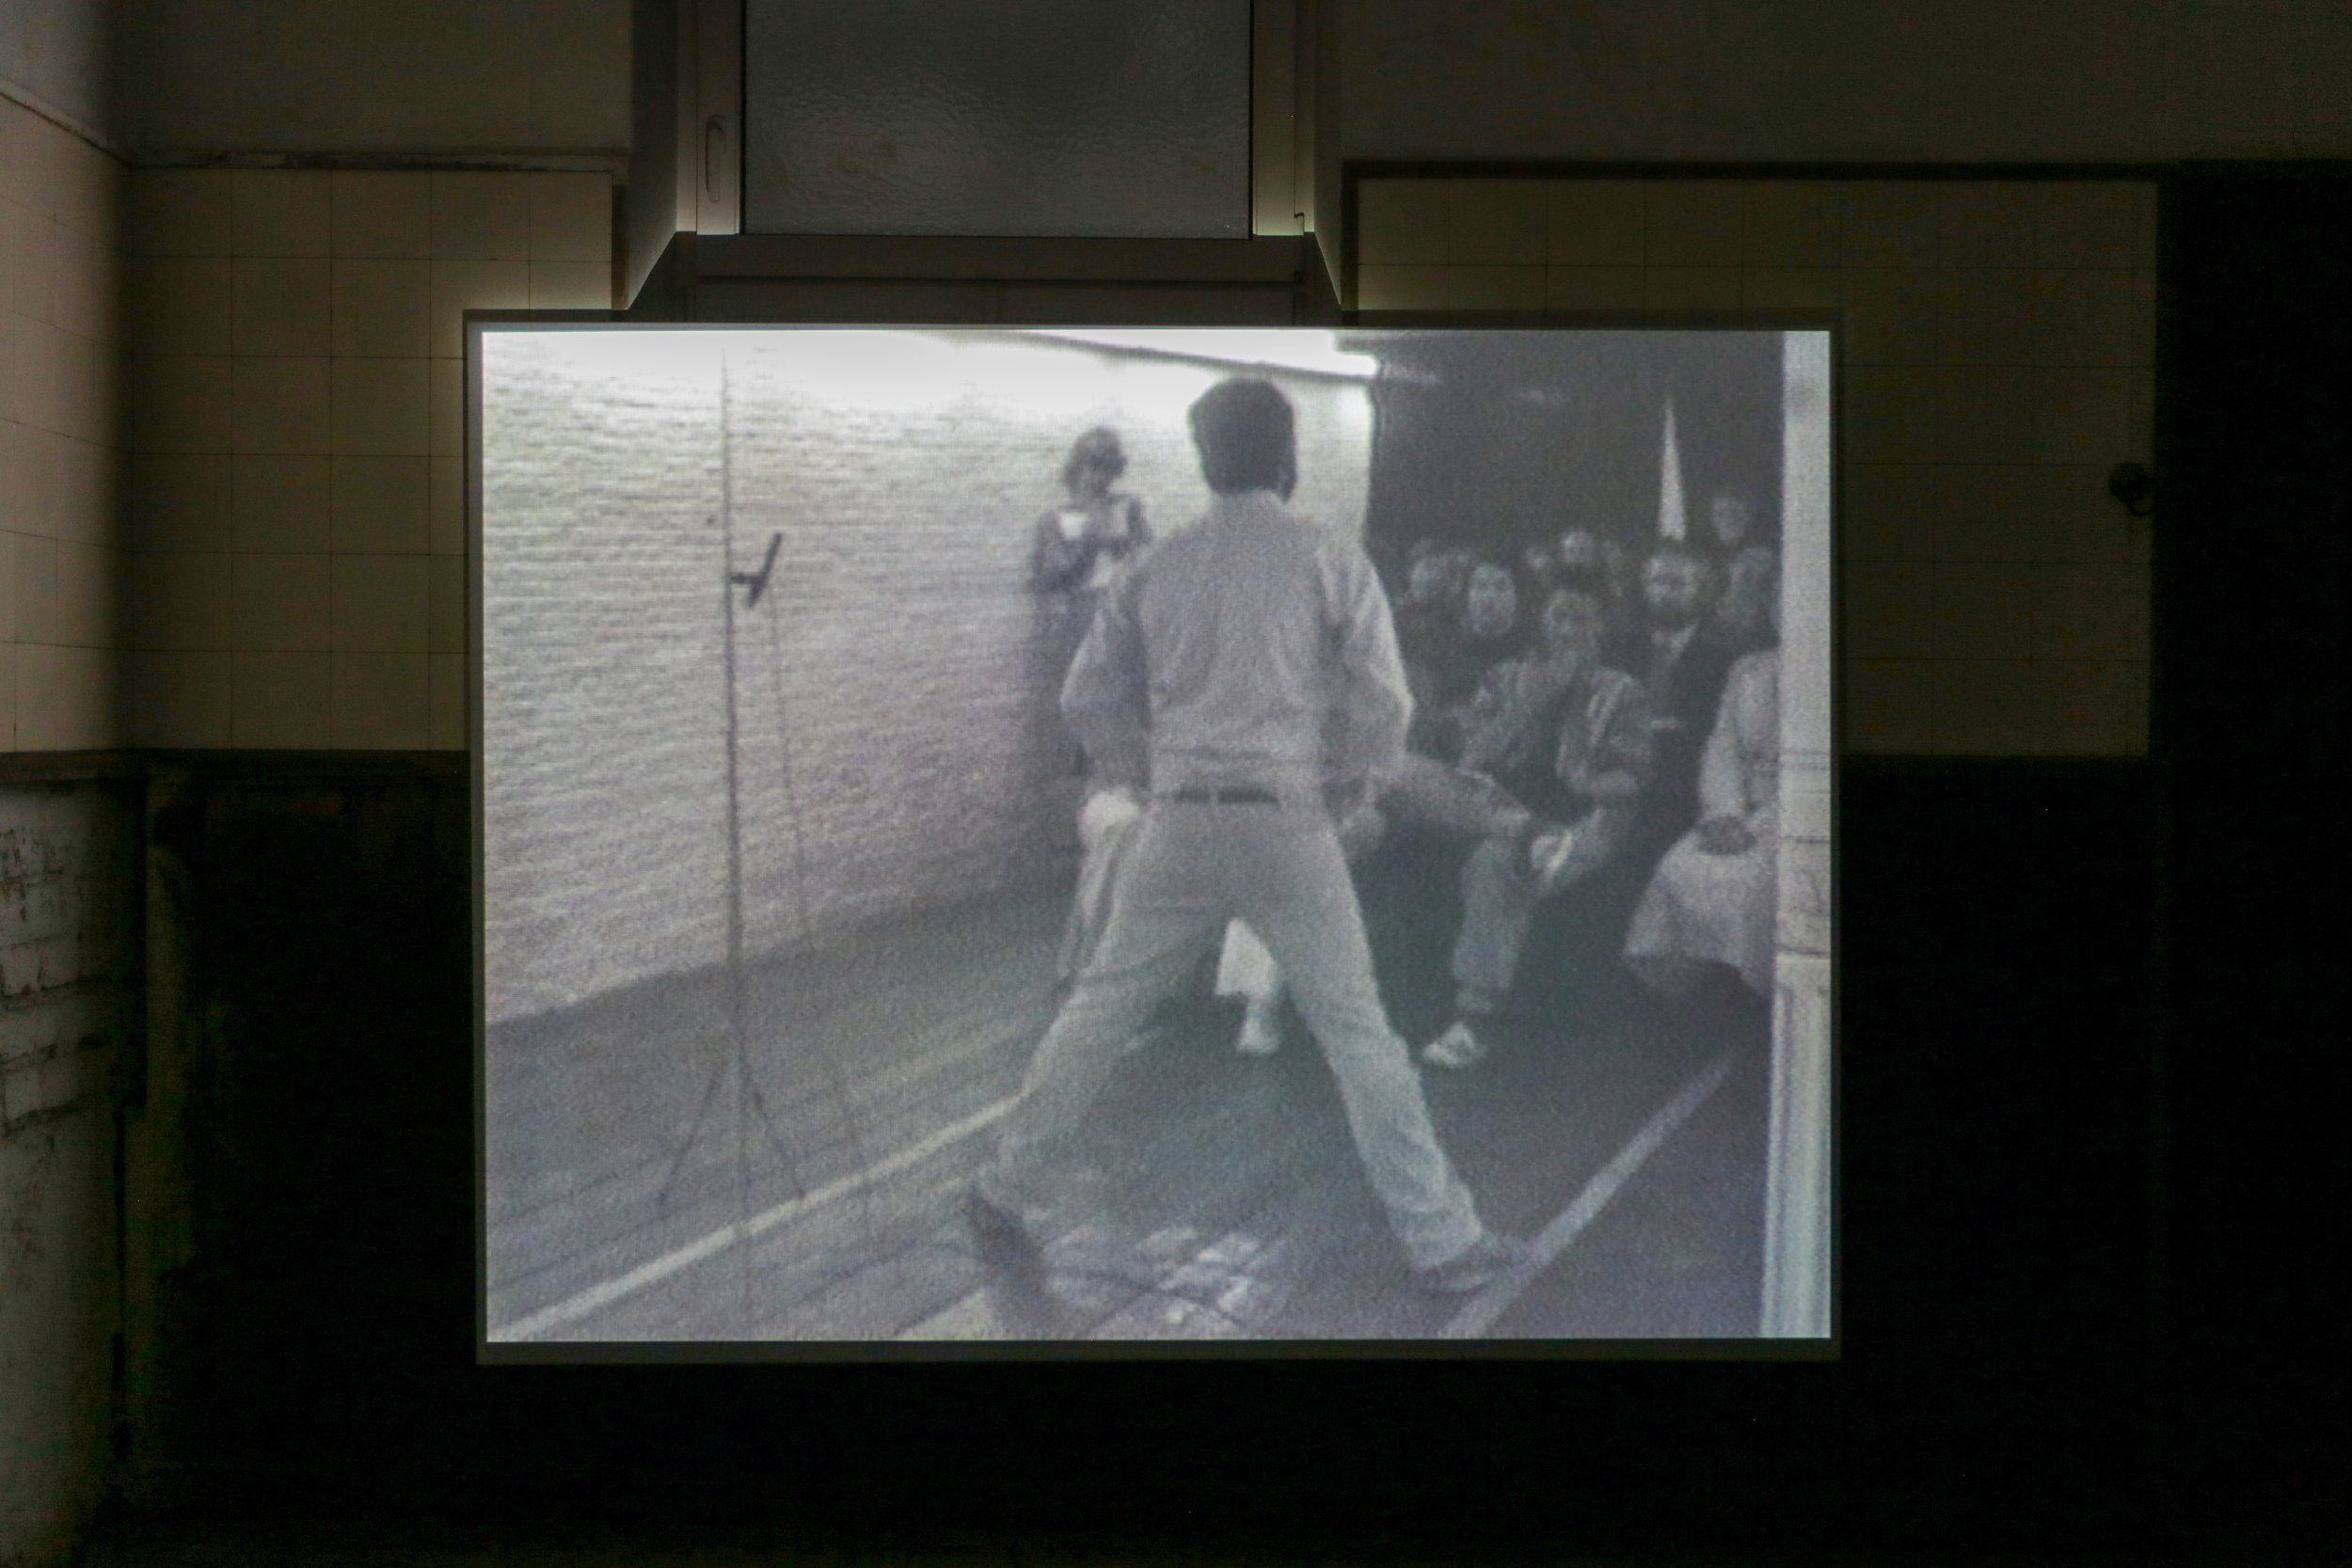   fig6 installation view Dan Graham, Audience/Performer/Mirror, 1977, 00:17:45., In collections: De Appel, LIMA  